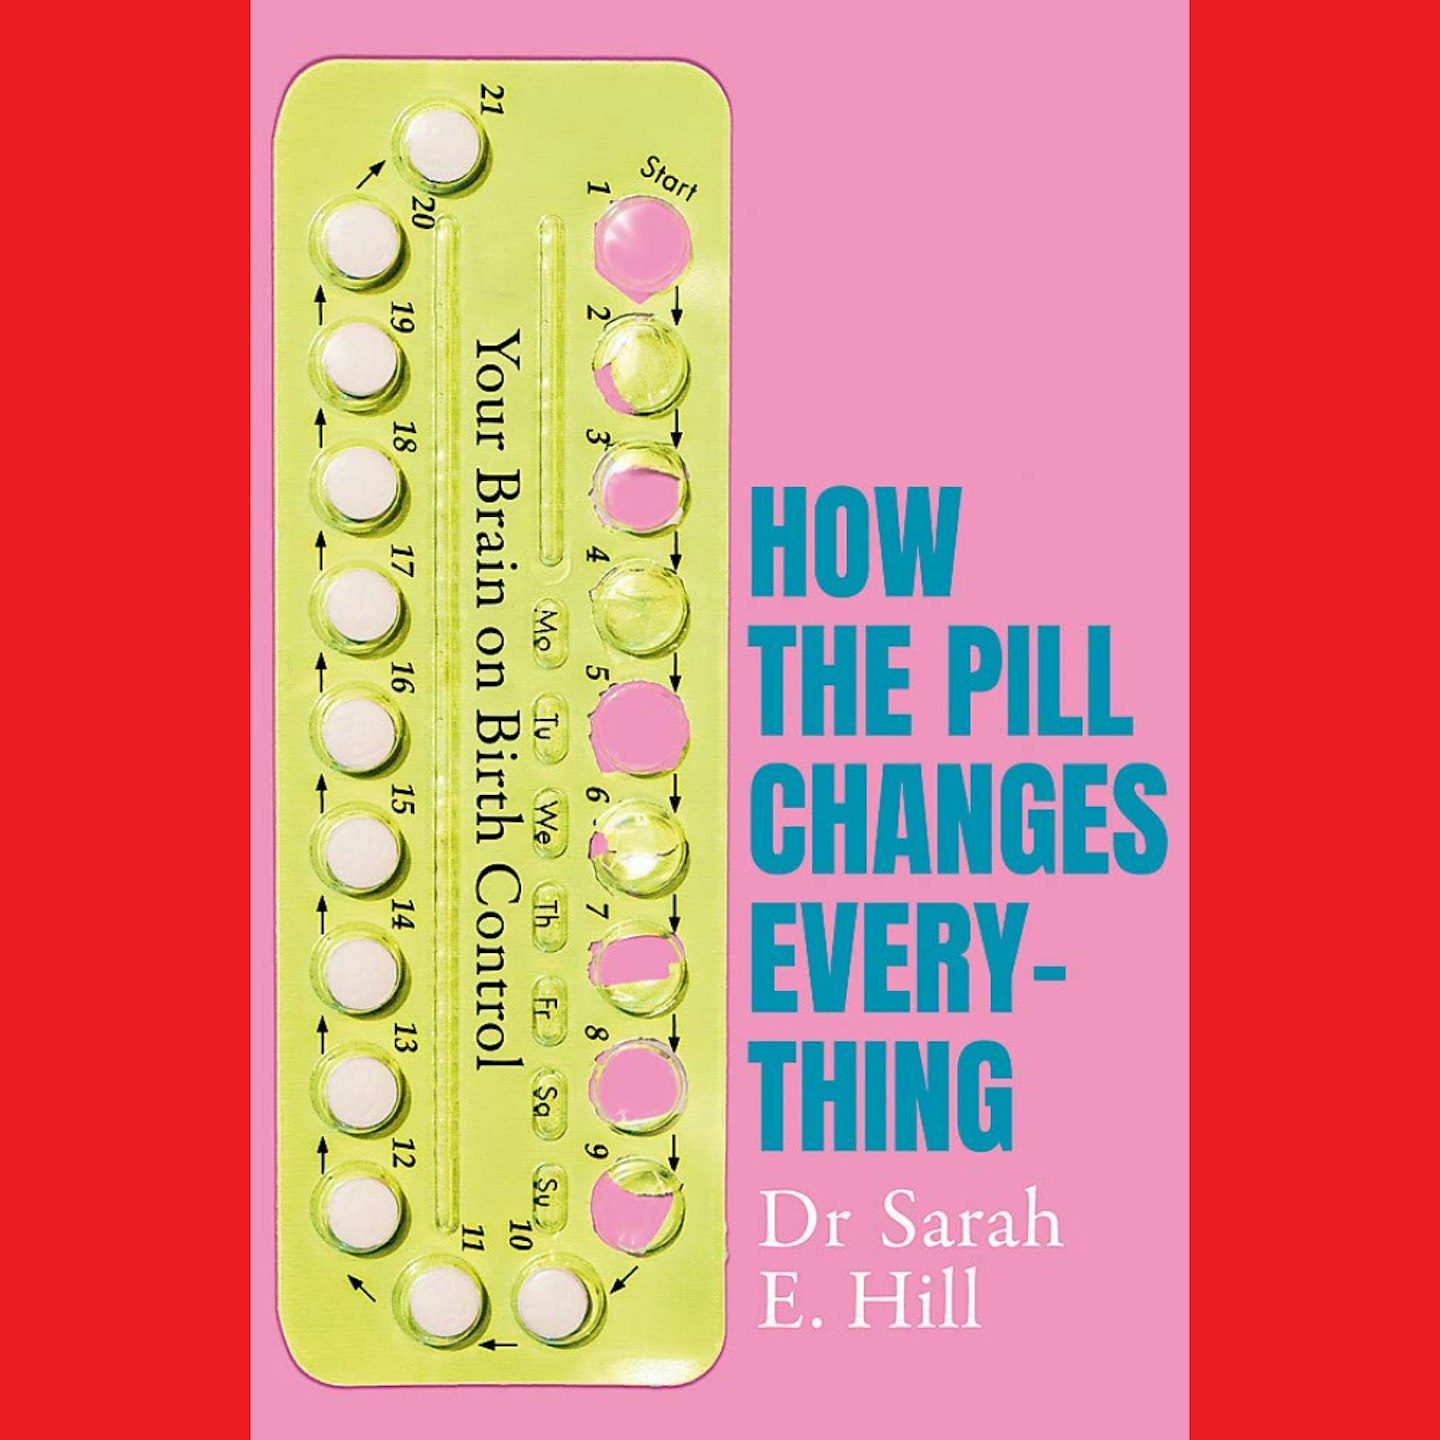 #BookTok How the Pill Changes Everything by Dr Sarah E. Hill